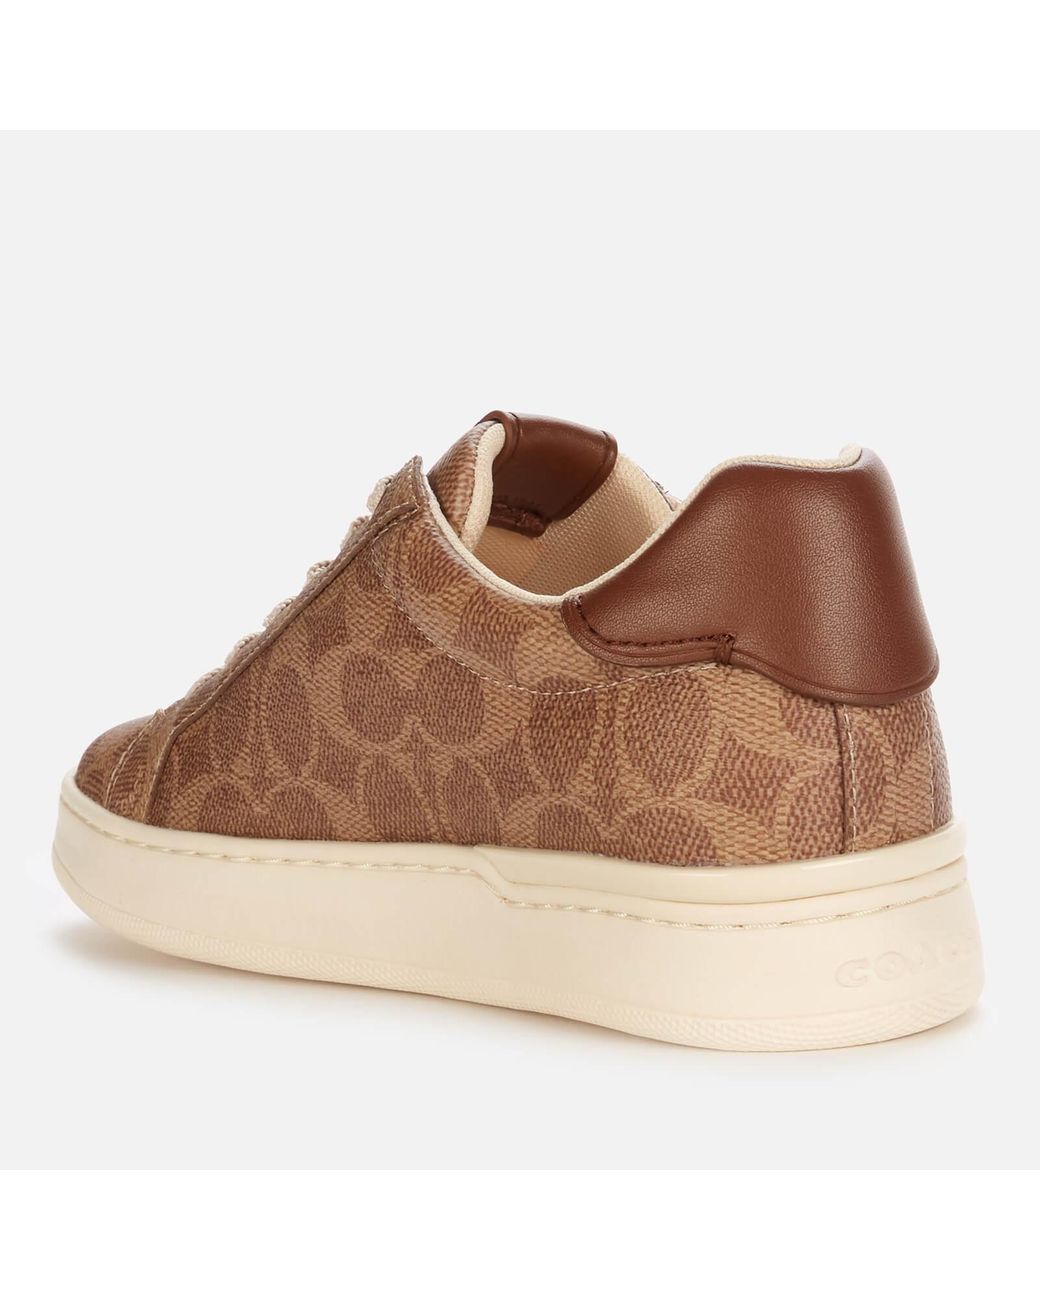 COACH Lowline Coated Canvas Trainers in Tan (Brown) - Lyst